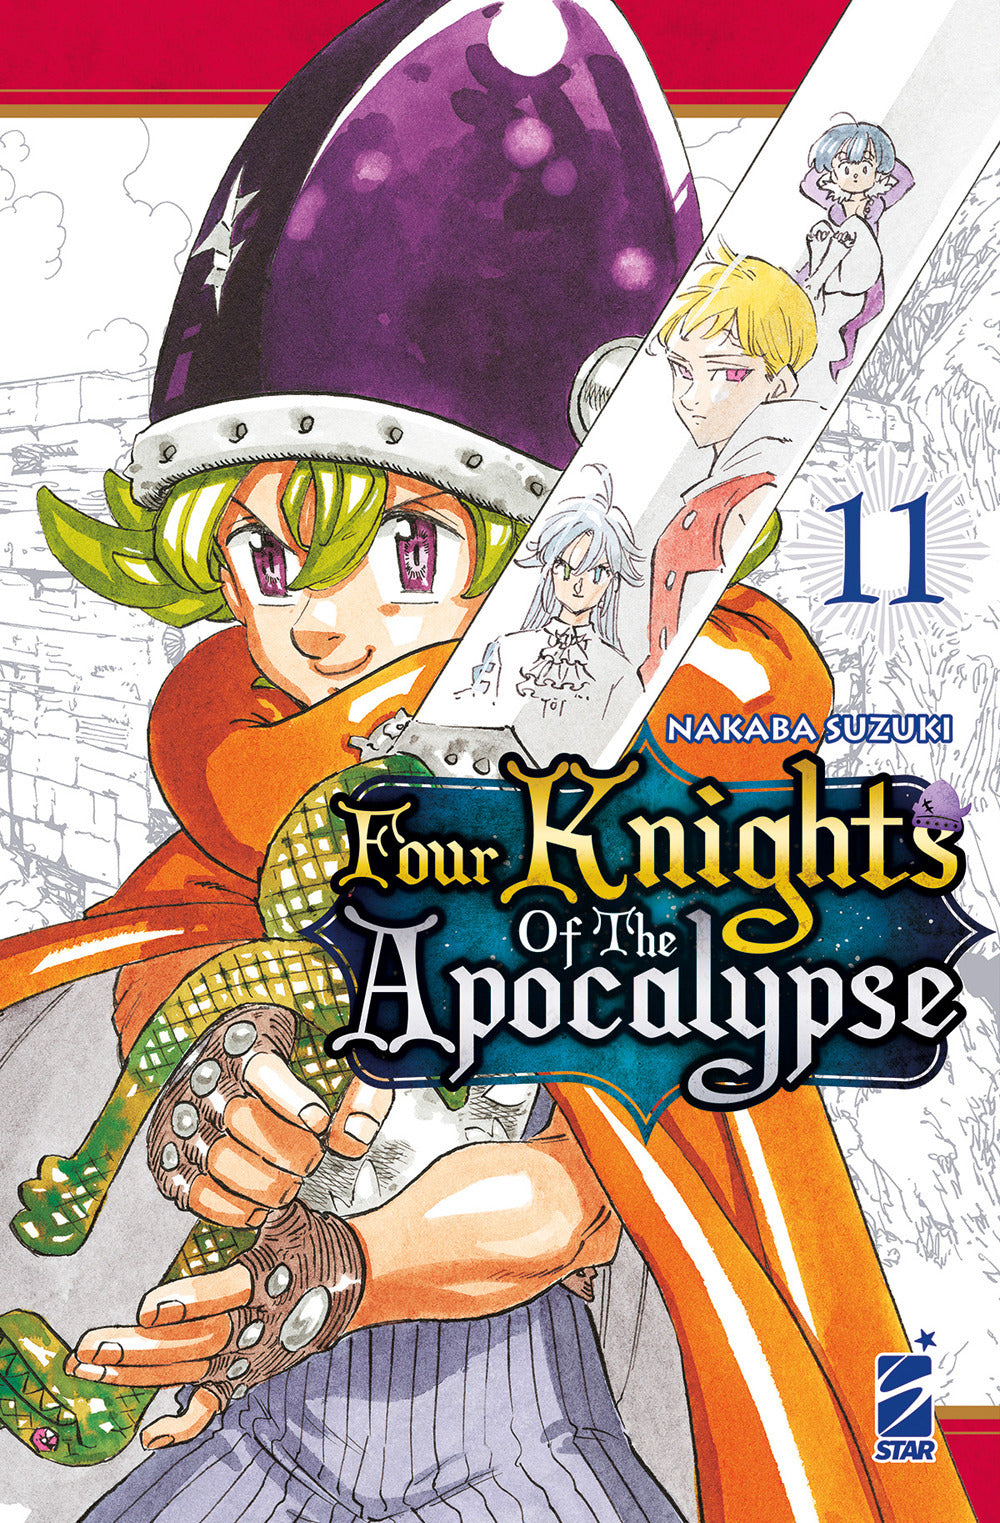 Four knights of the apocalypse. Vol. 11